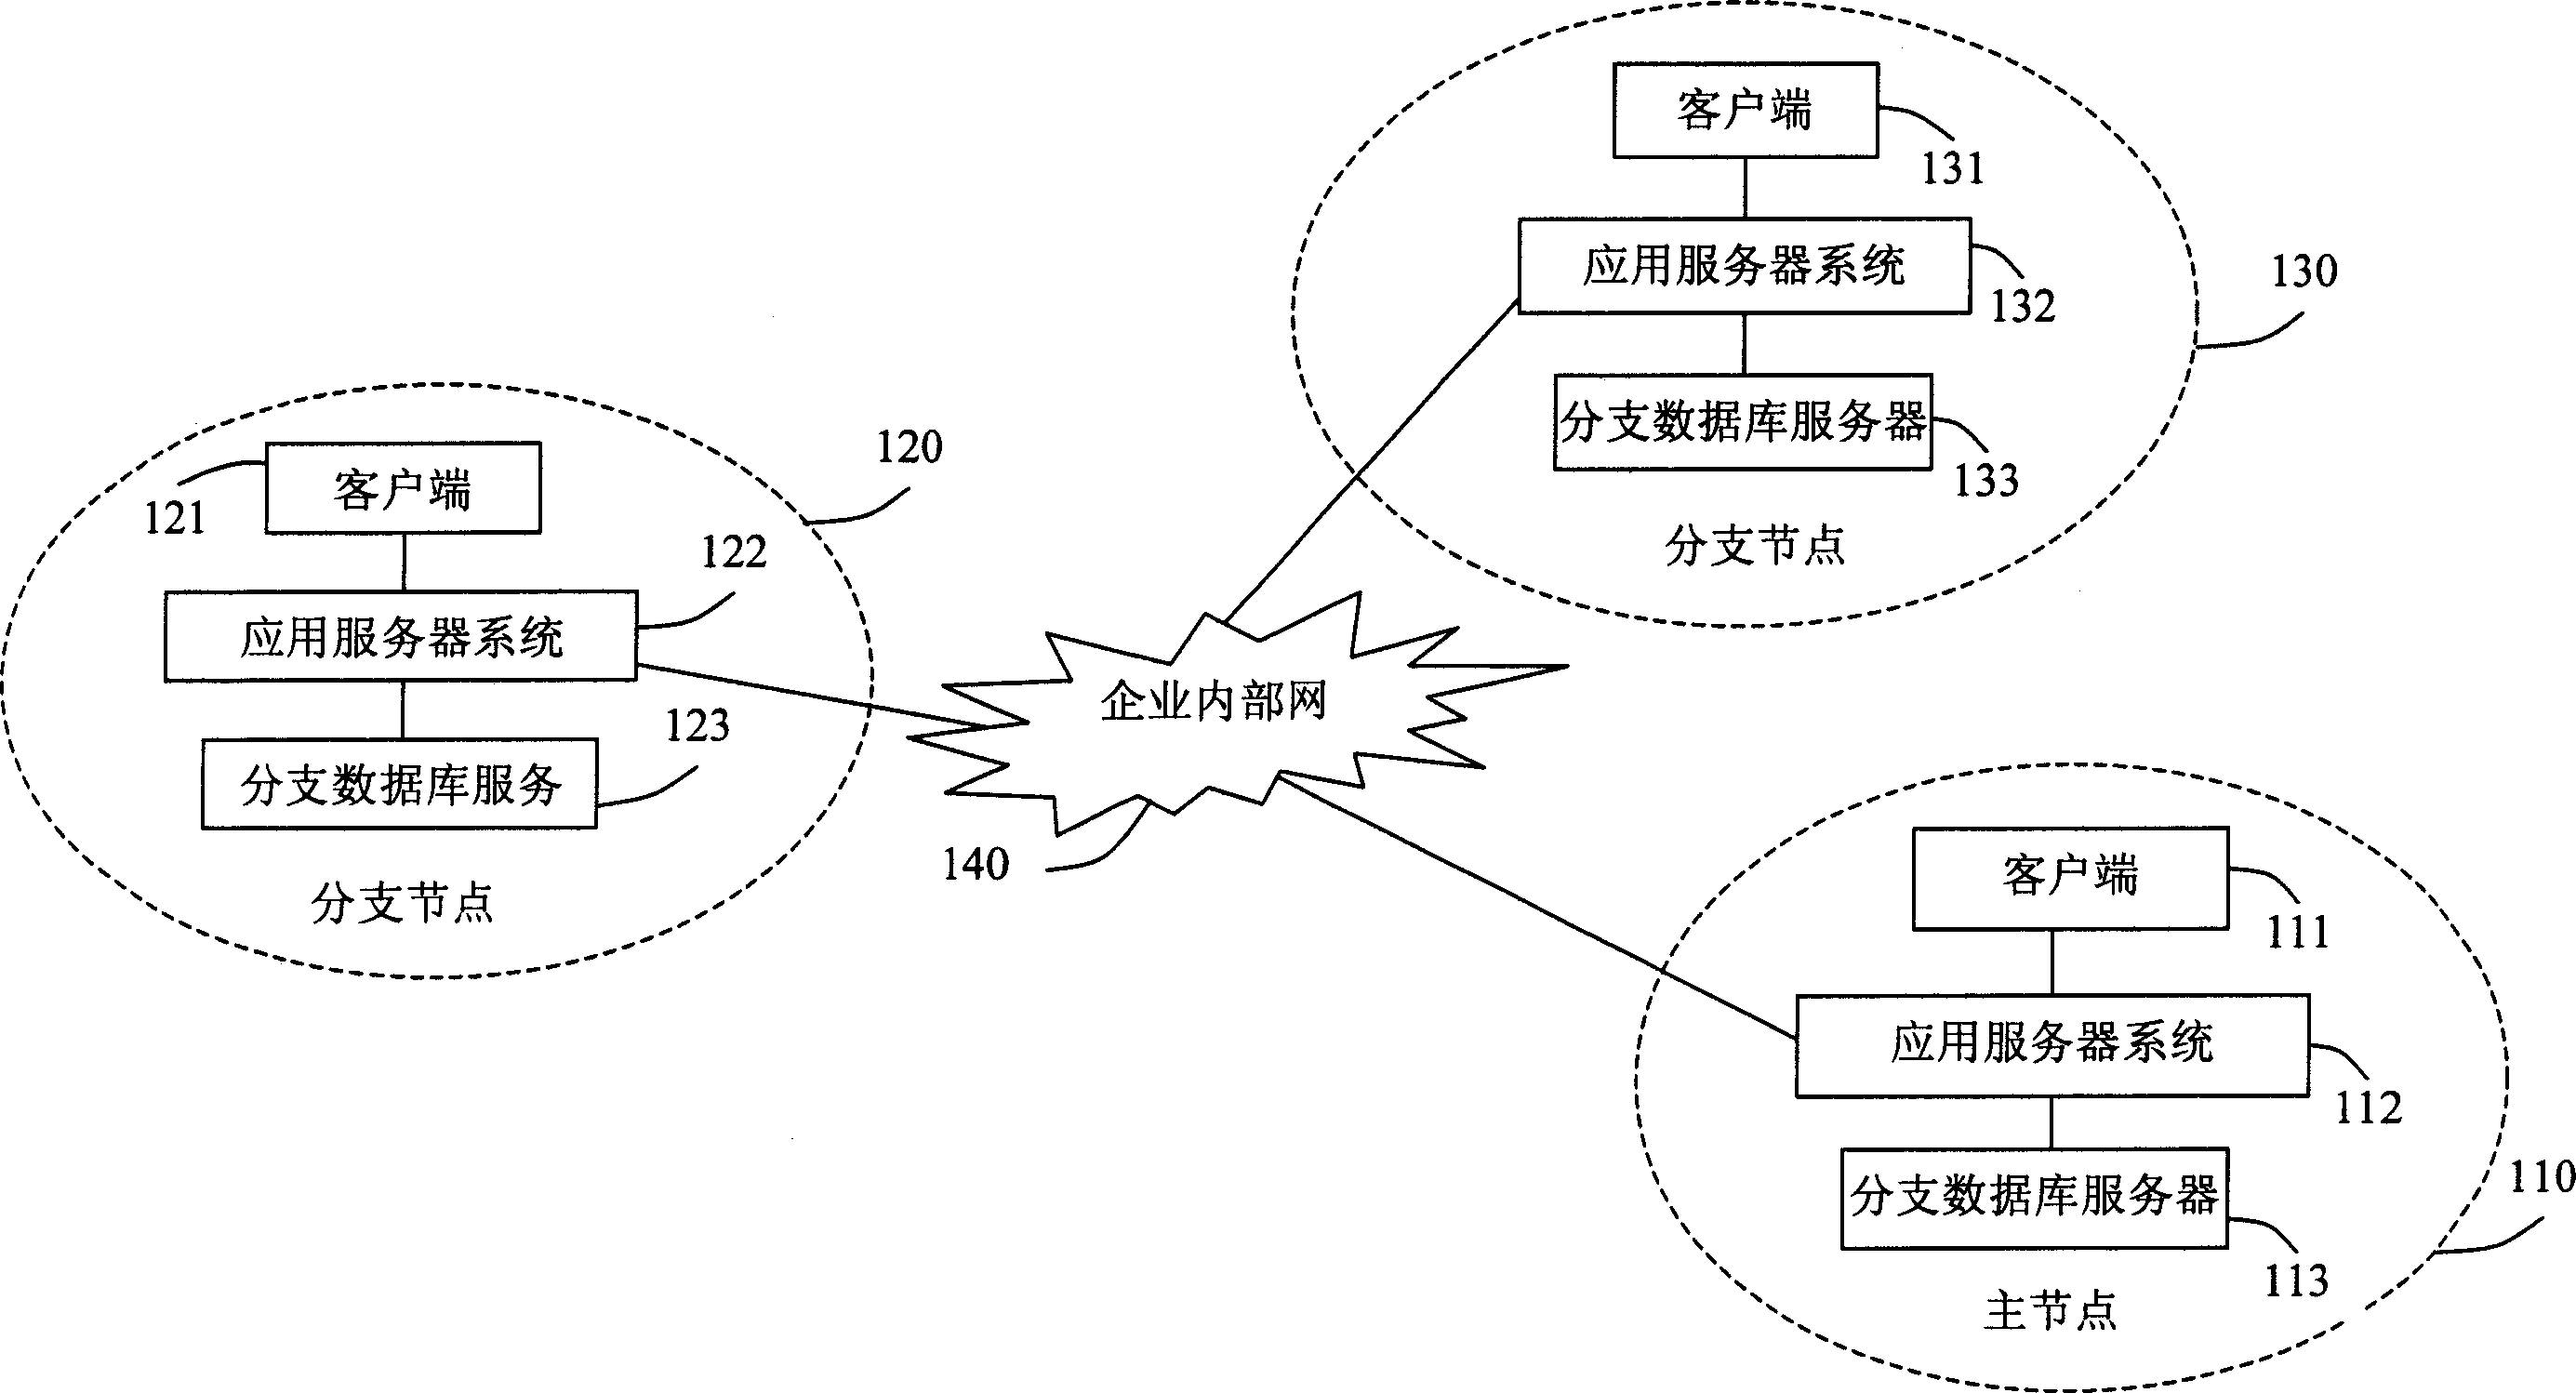 Synchronous system in distributed files and method